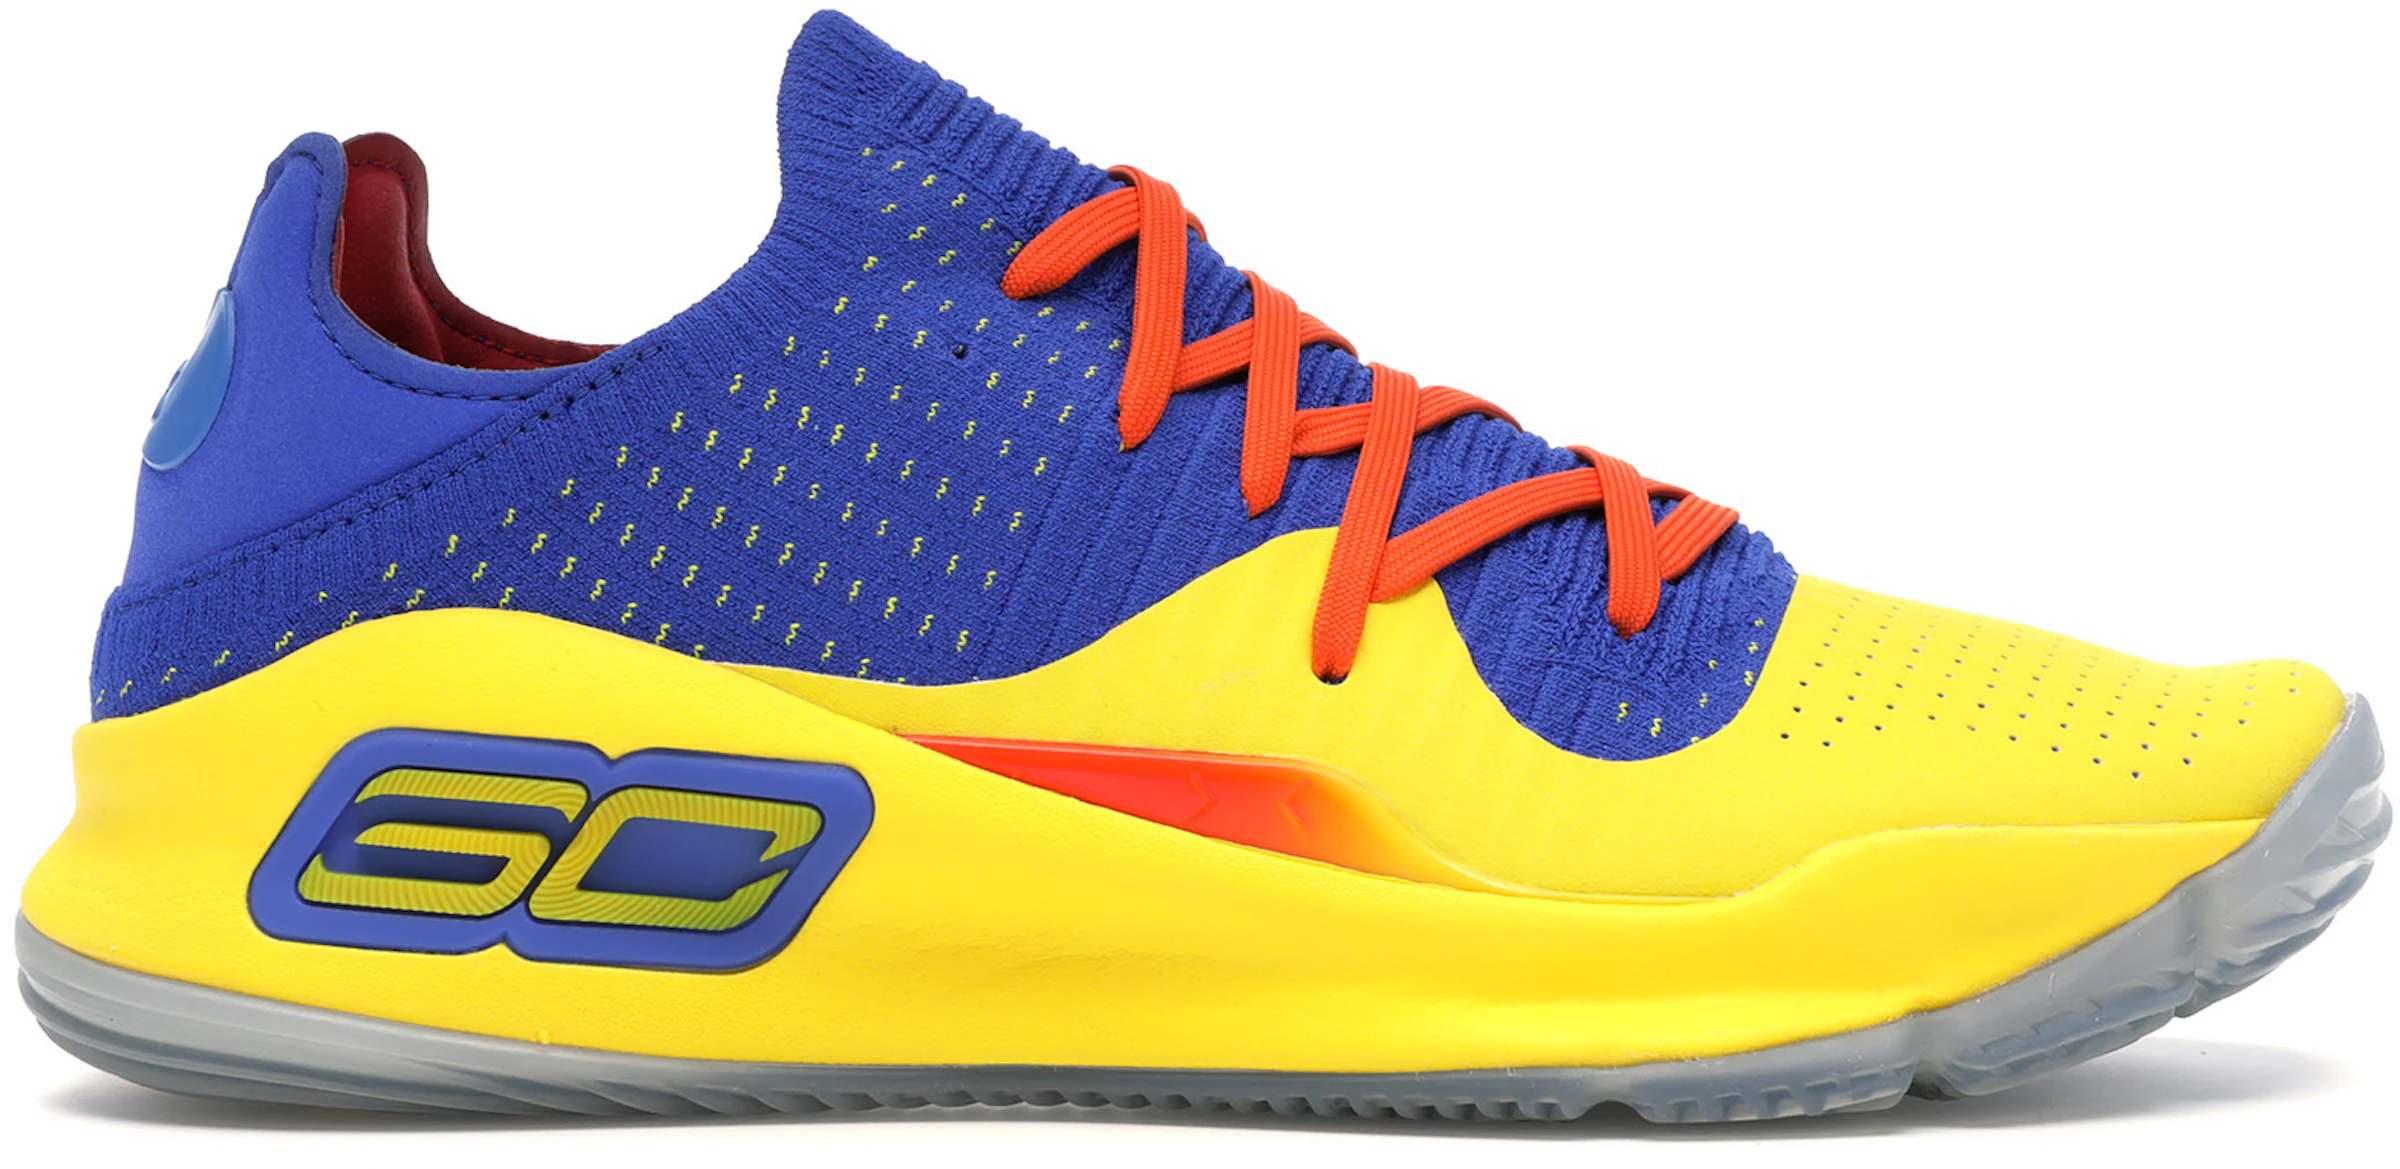 Under Armour Curry 4 Low - 3000083-402 -